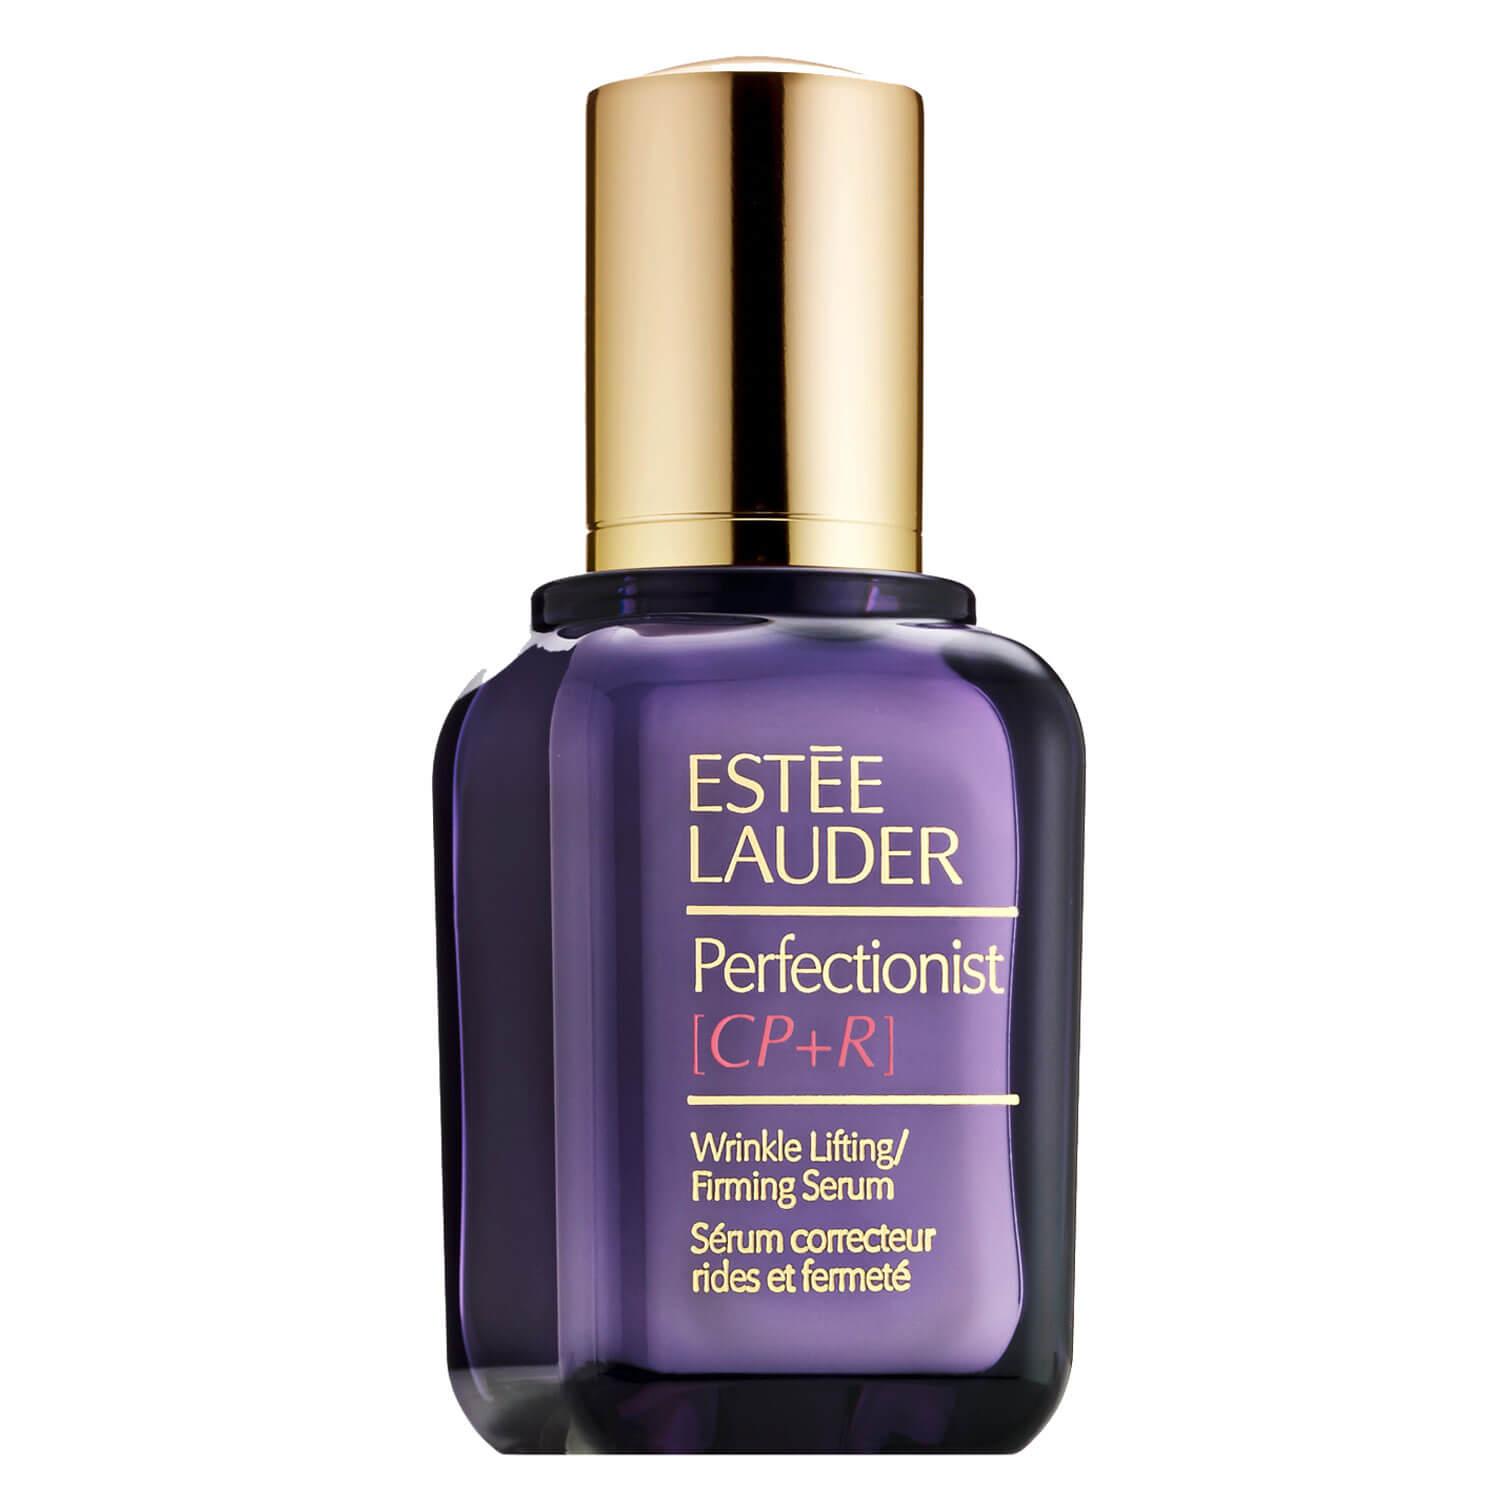 Perfectionist - [CP+R] Wrinkle Lifting/Firming Serum